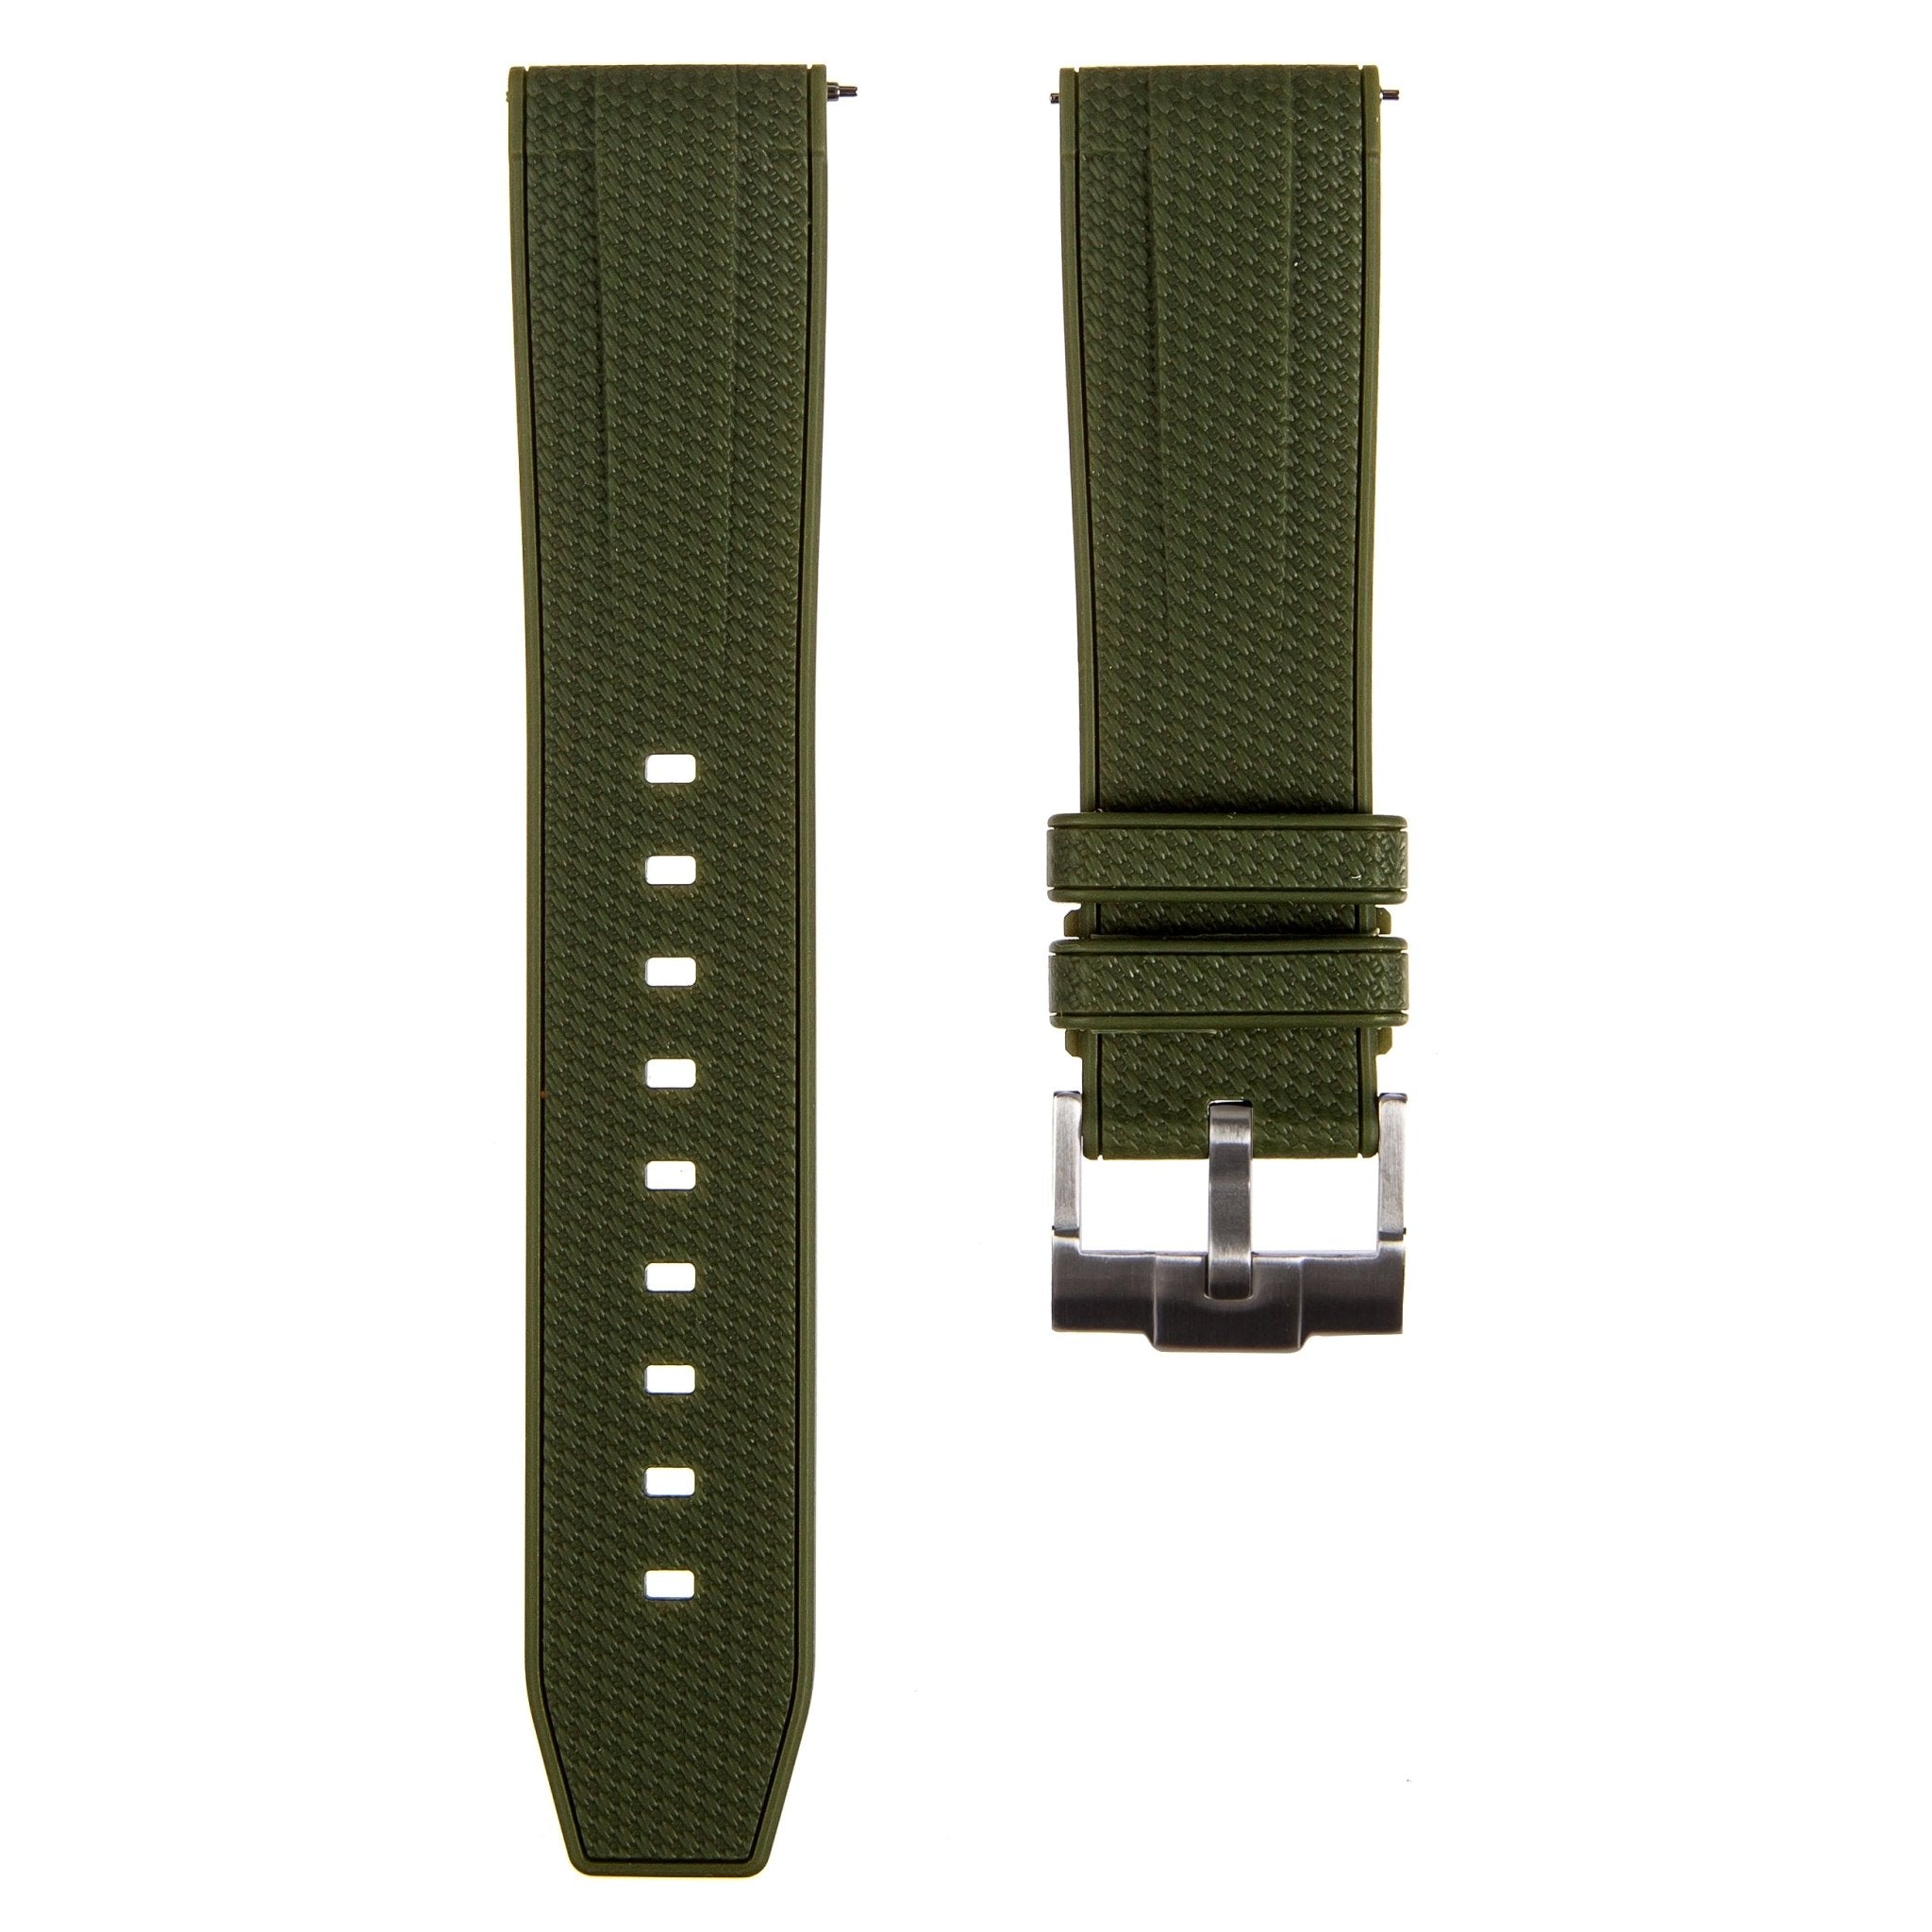 Flexweave Premium SIlicone Rubber Strap - Quick-Release - Compatible with Blancpain x Swatch – Army Green (2423) -Strapseeker